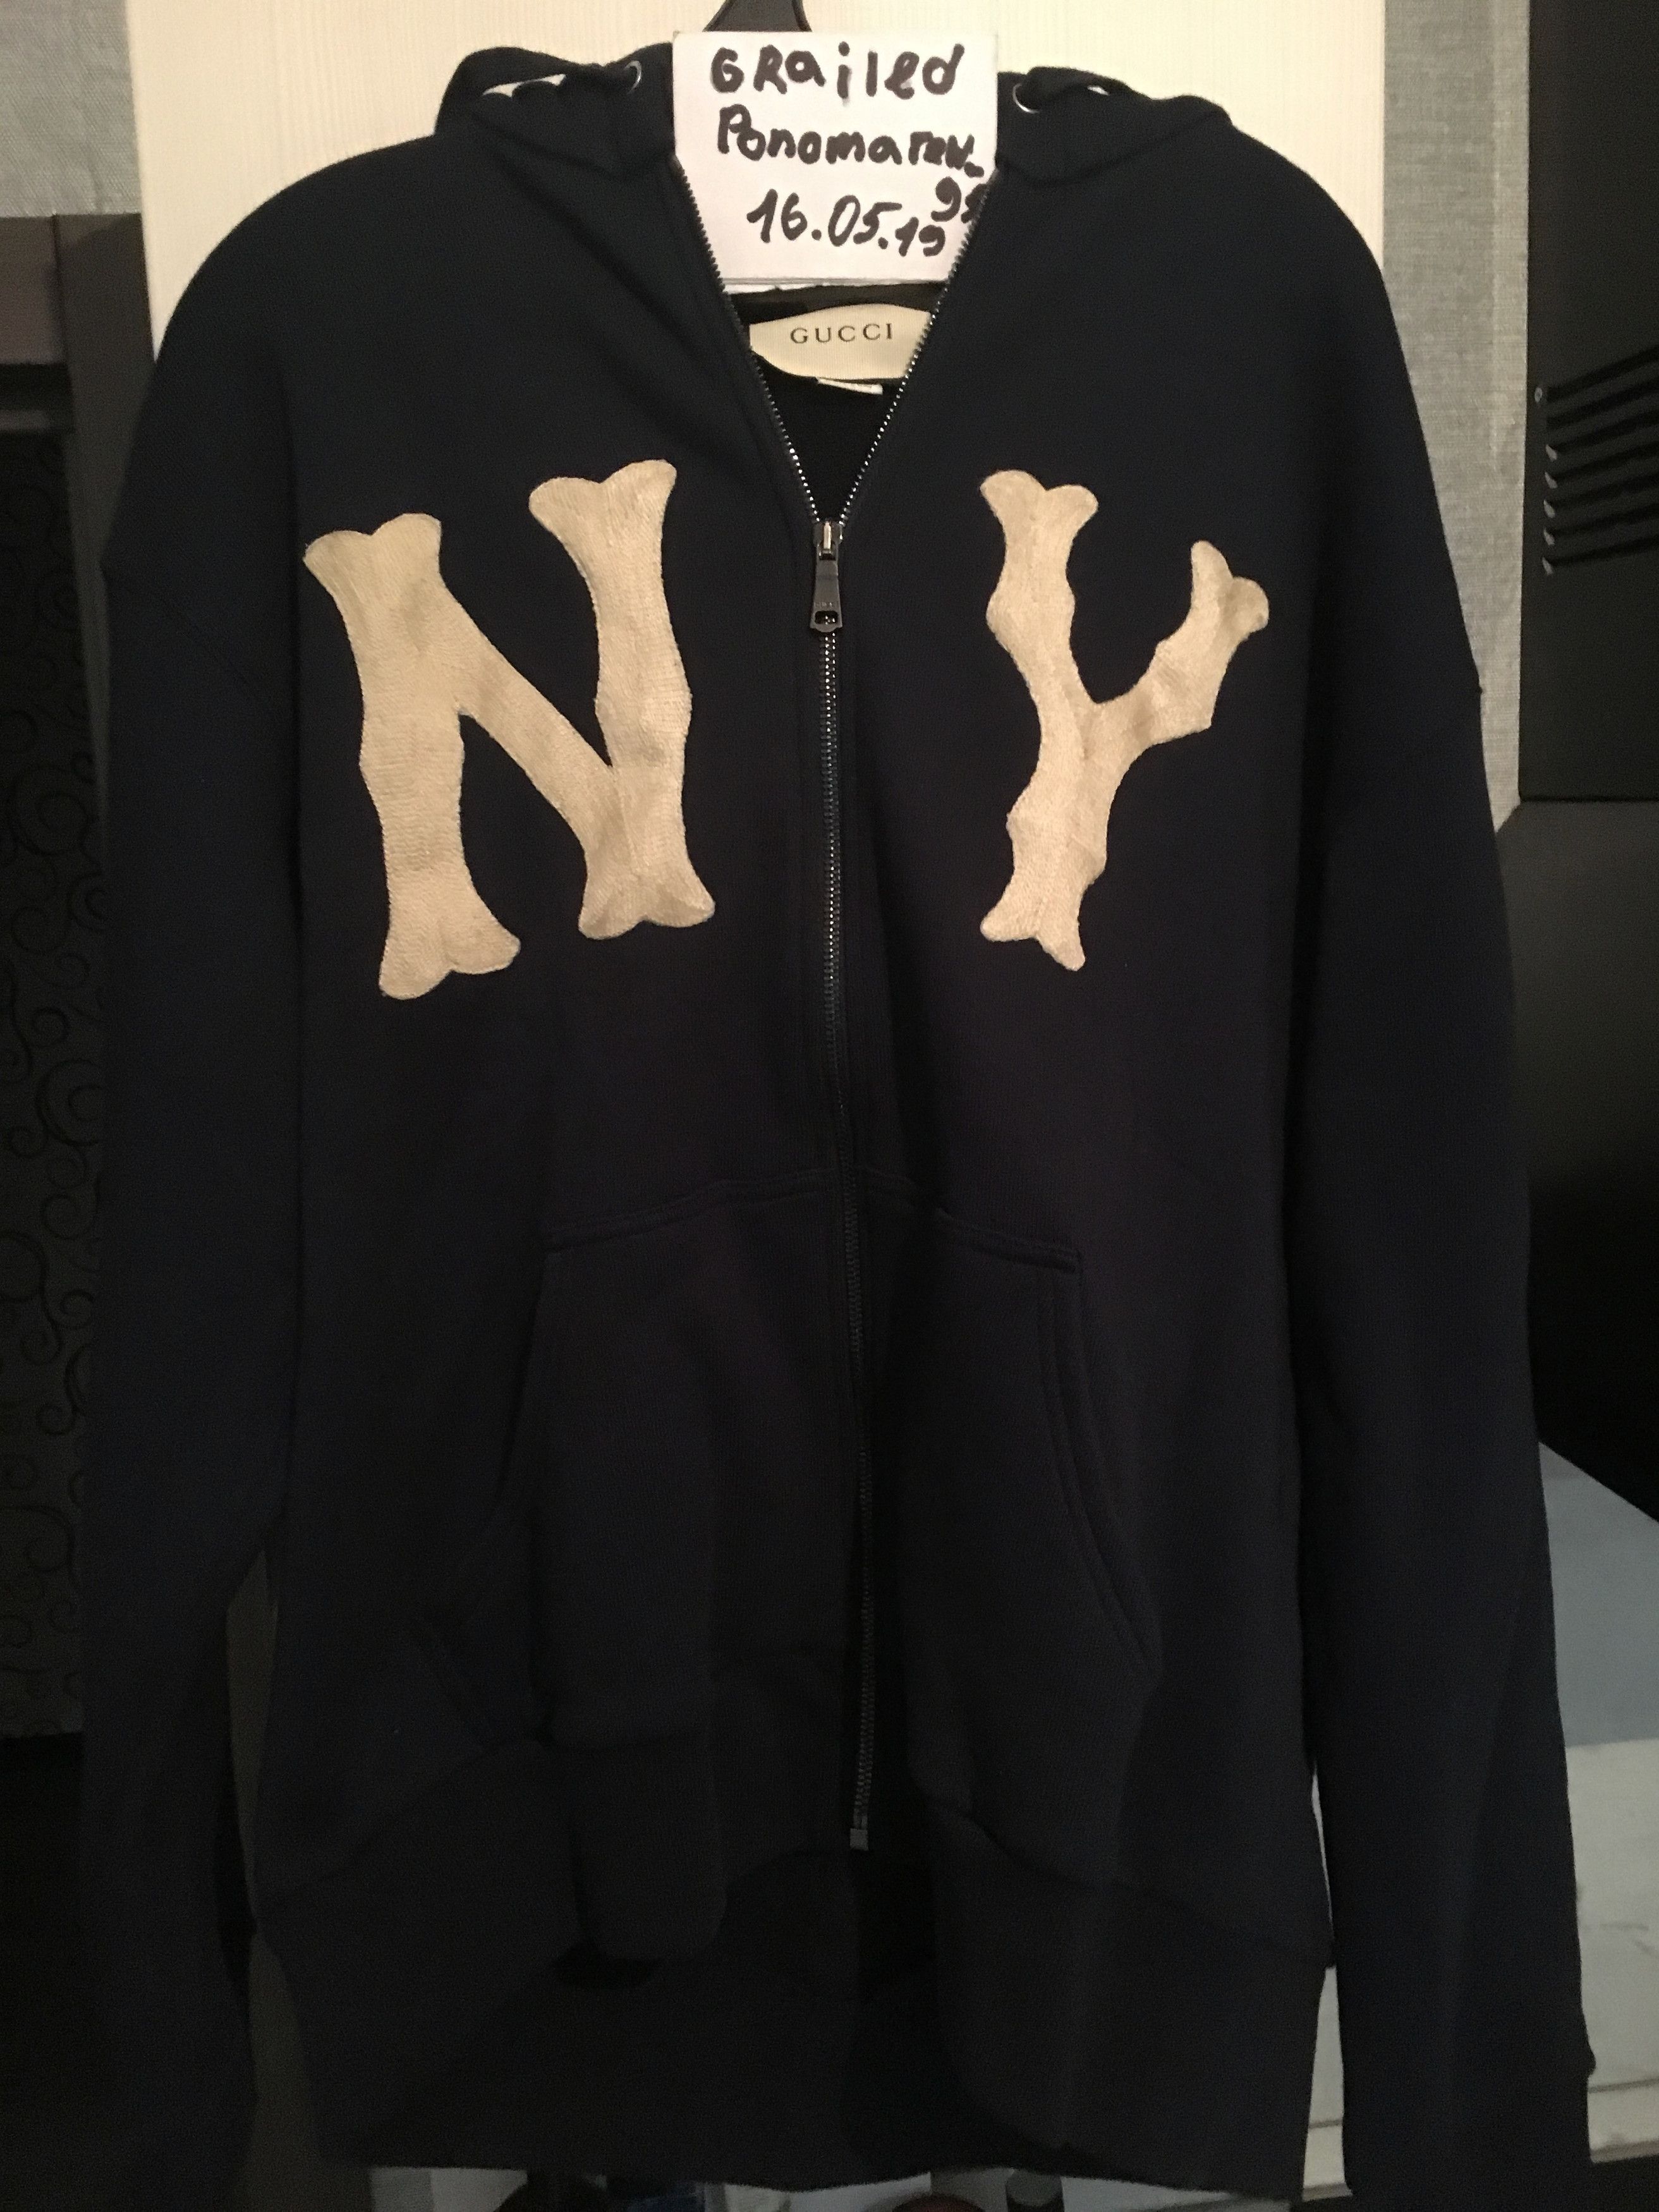 Gucci Sweatshirt With NY Yankees™ Patch - Farfetch